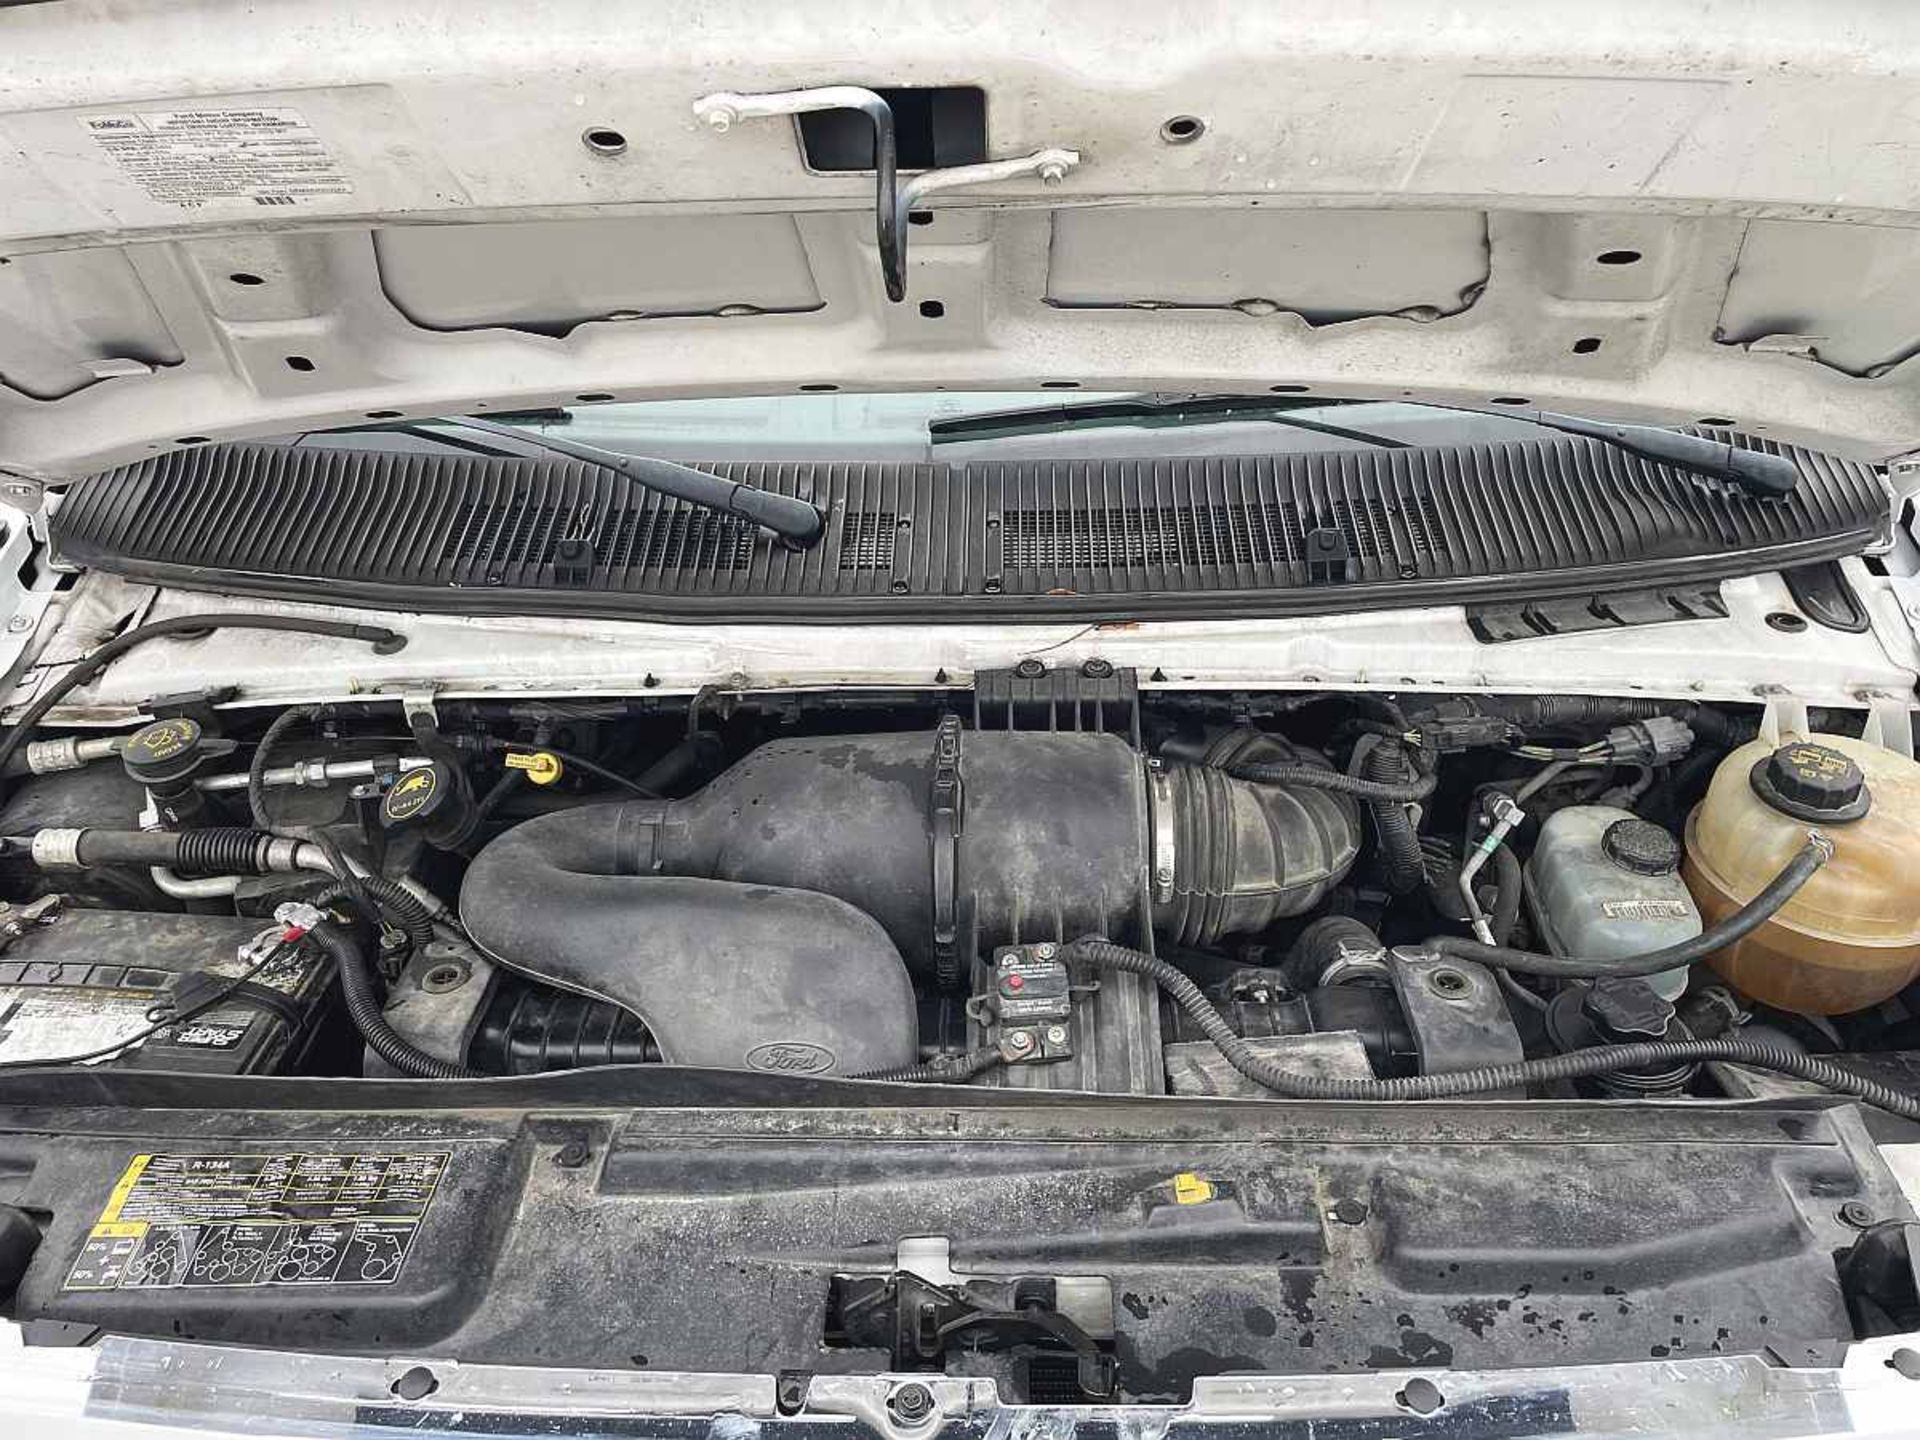 2016 Ford E450 Super Duty Delivery Truck, w/ Just Replaced NEW Engine, - Image 14 of 19